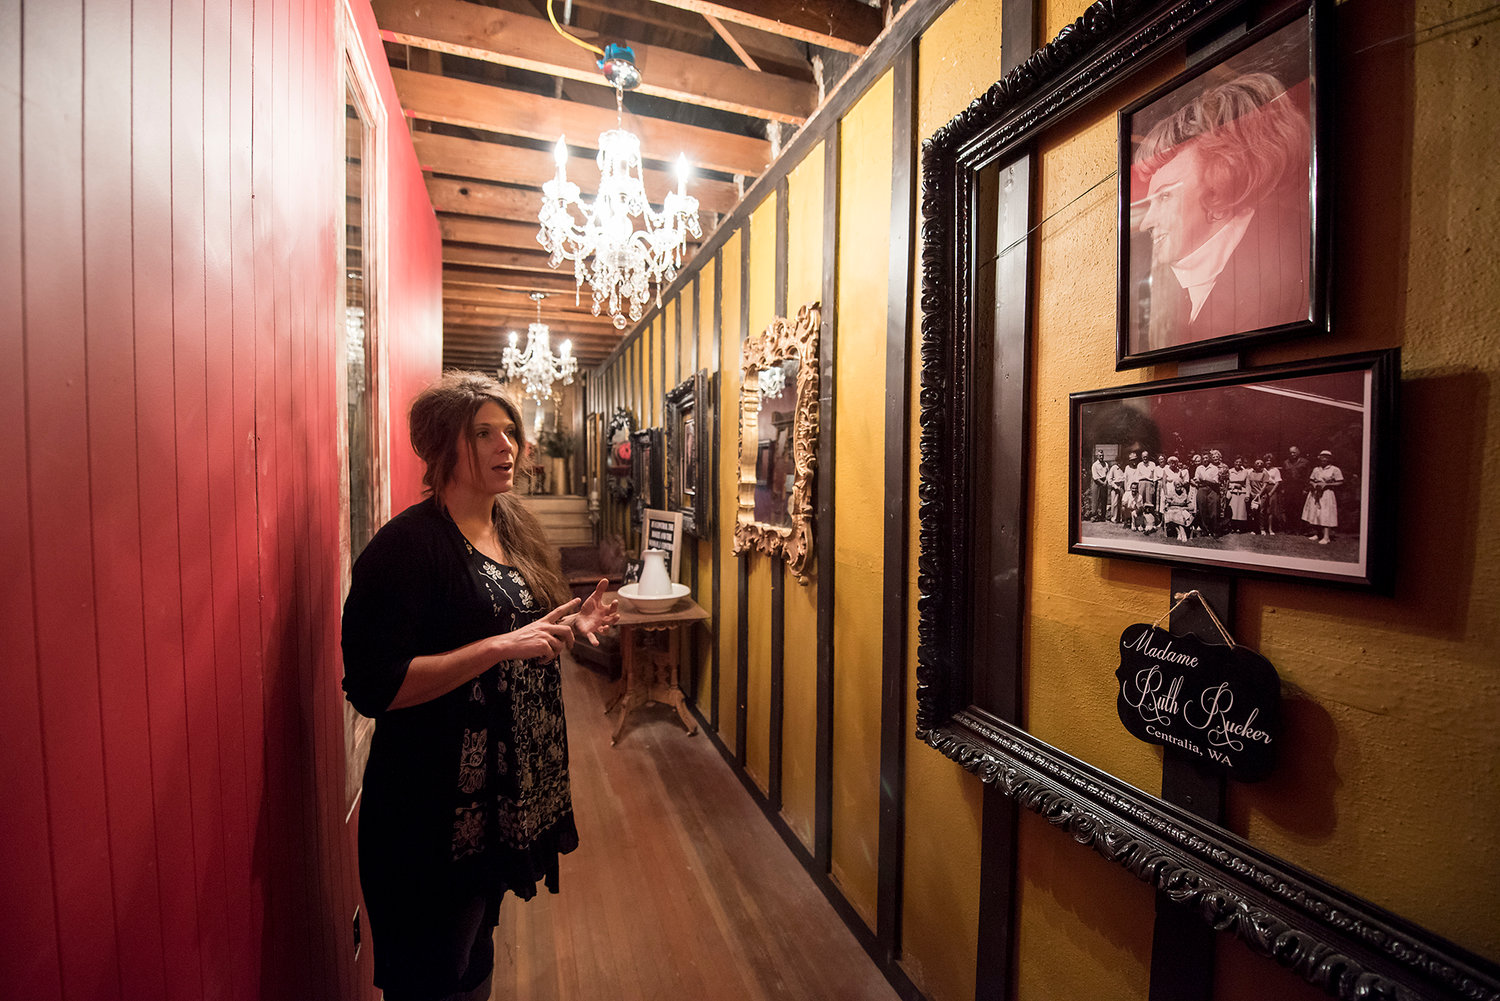 FILE PHOTO — Holly Phelps, owner of the Shady Lady in downtown Centralia, stands in the narrow hallway adorned with pictures of Madame Ruth Rucker, who ran a brothel in Centralia in the early 20th century, while giving a tour of her new Bordello Museum.